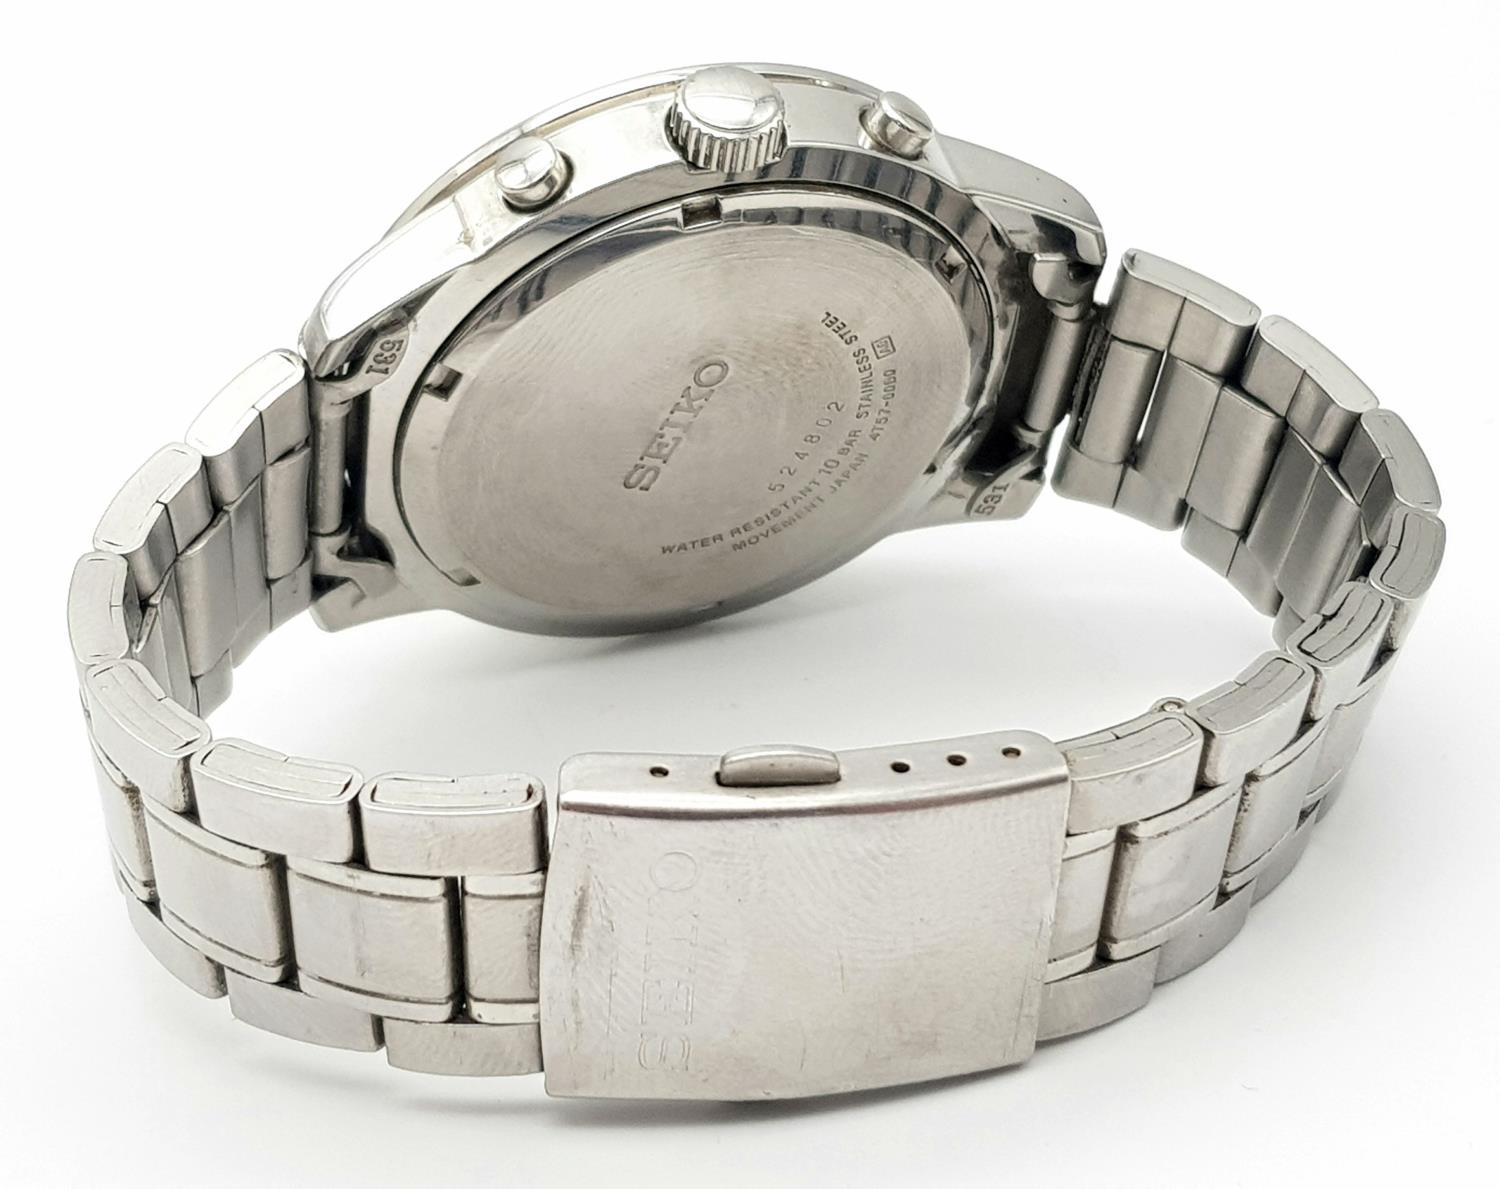 A Seiko 5 Chronograph Quartz Gents Watch. Stainless steel bracelet and case - 43mm. White dial - Image 5 of 6